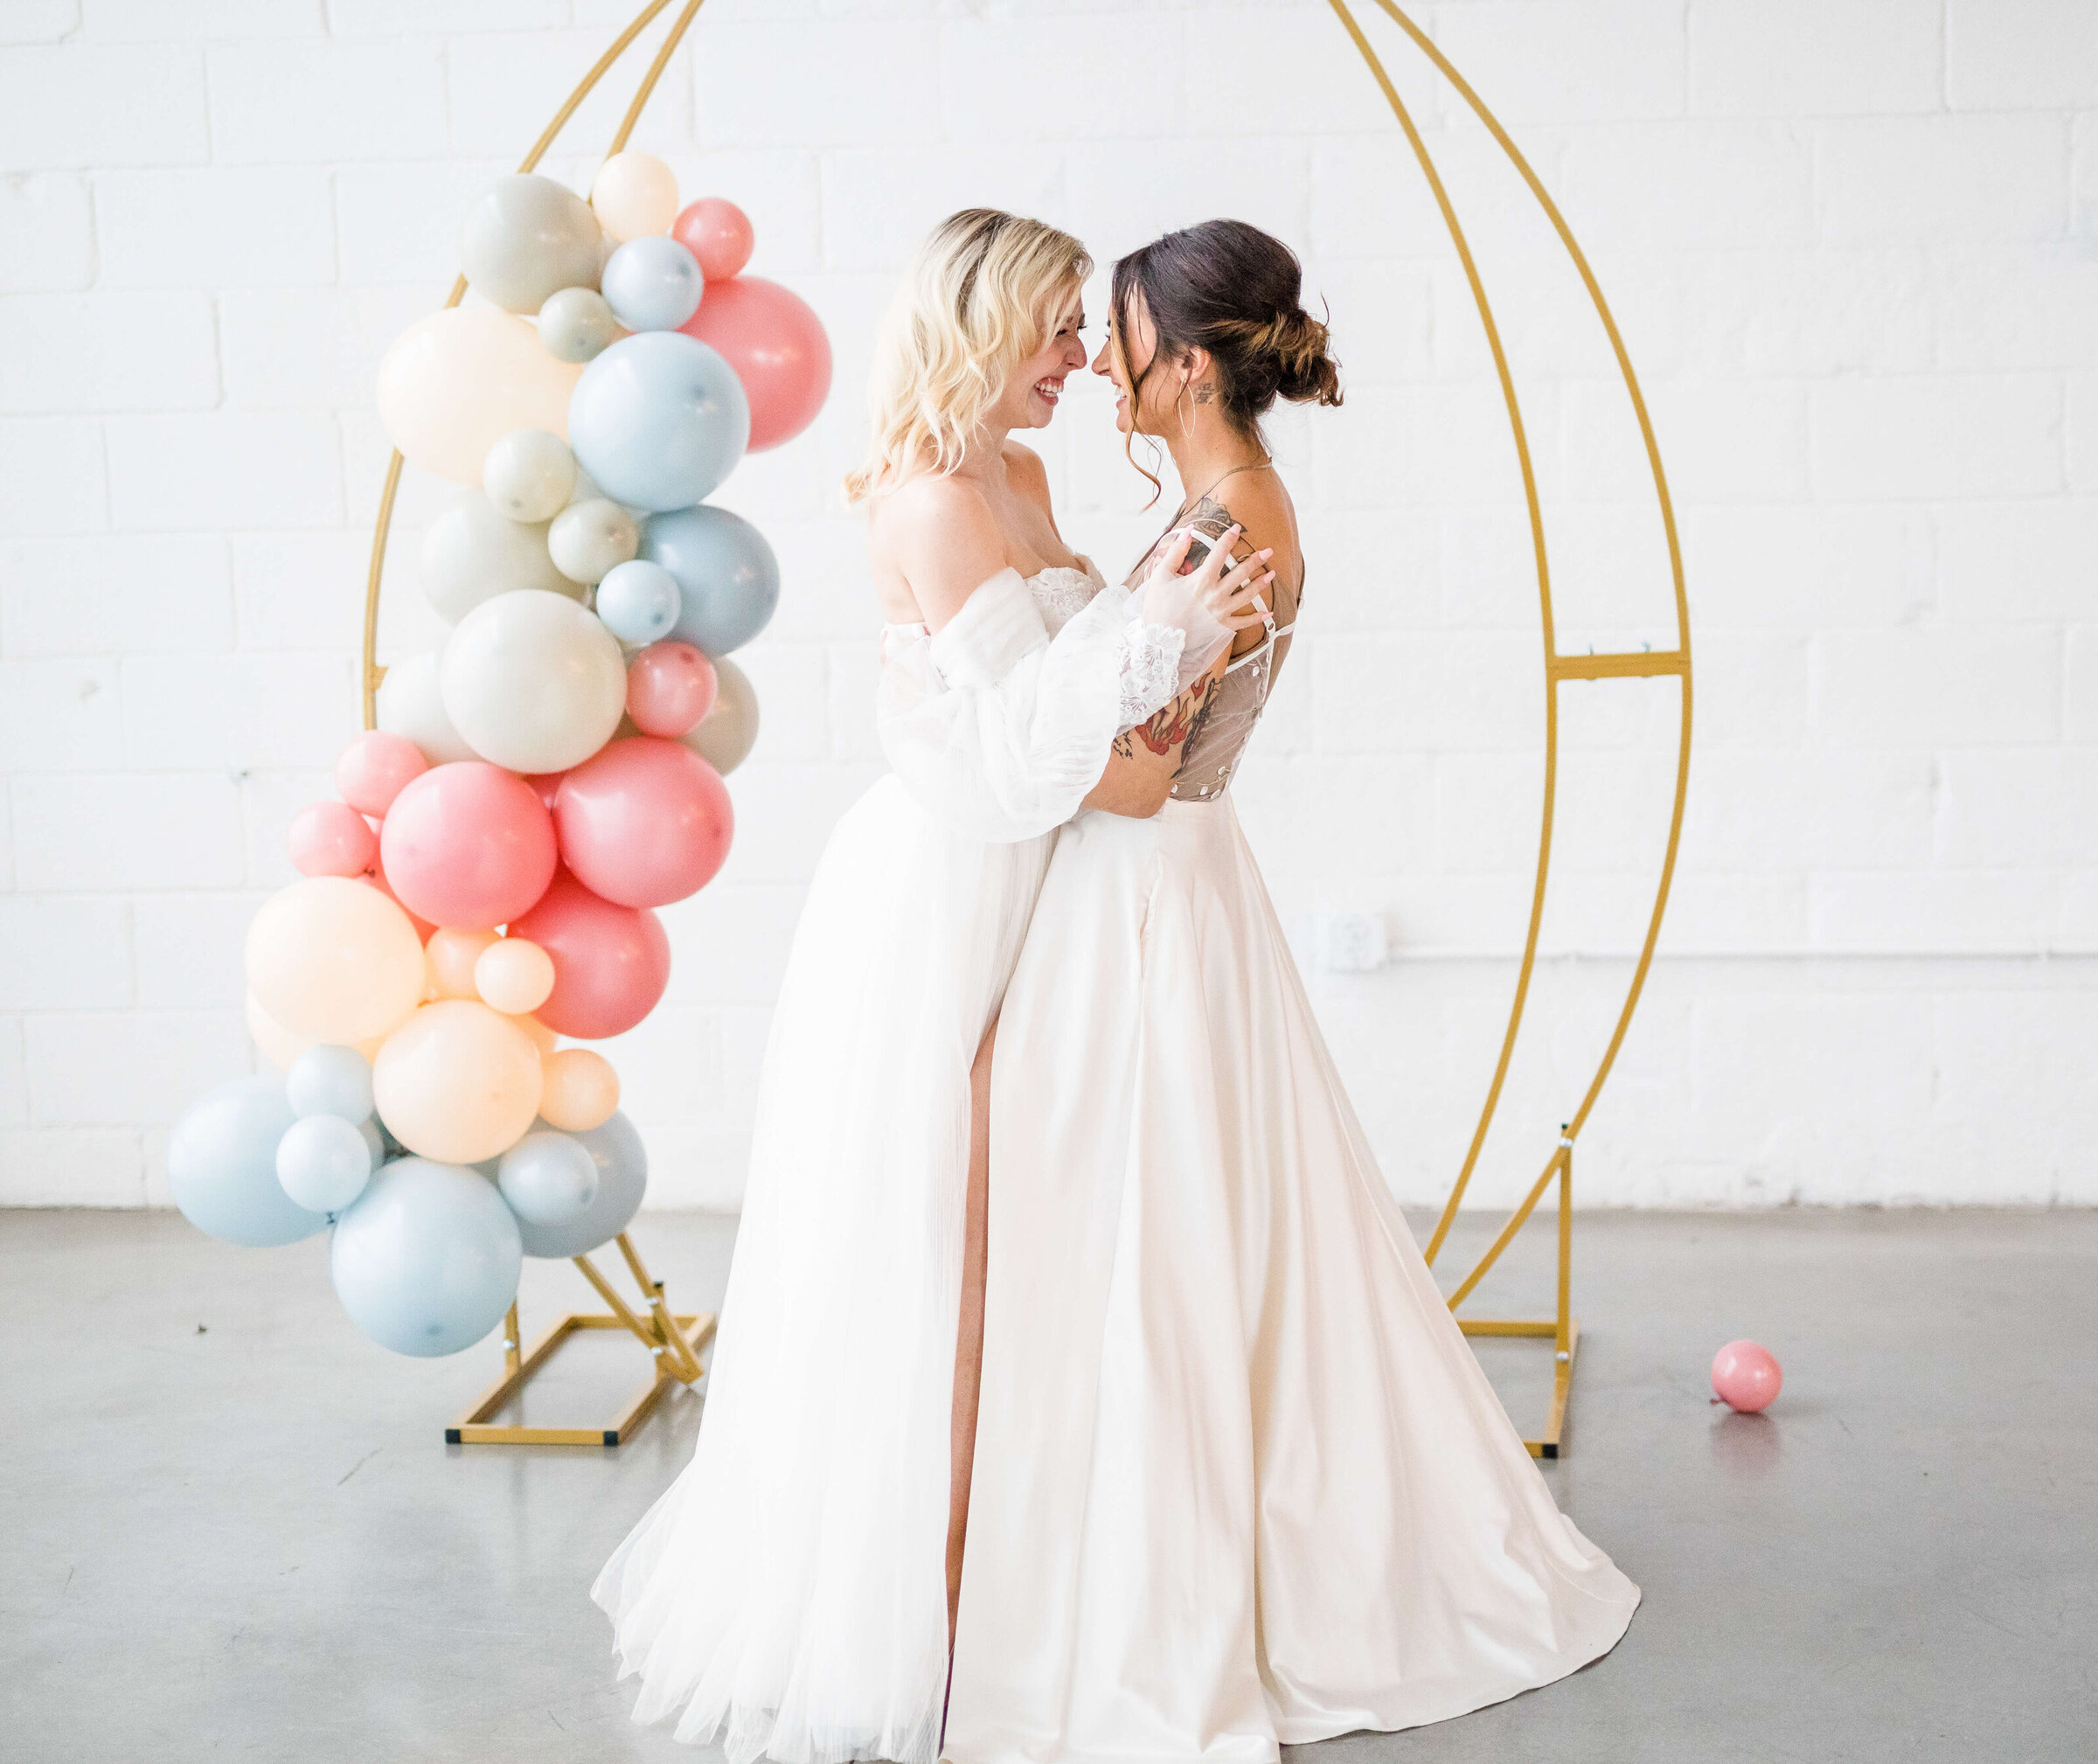 Two brides hug each other as they laugh. There is decor in back of them with rainbow balloons